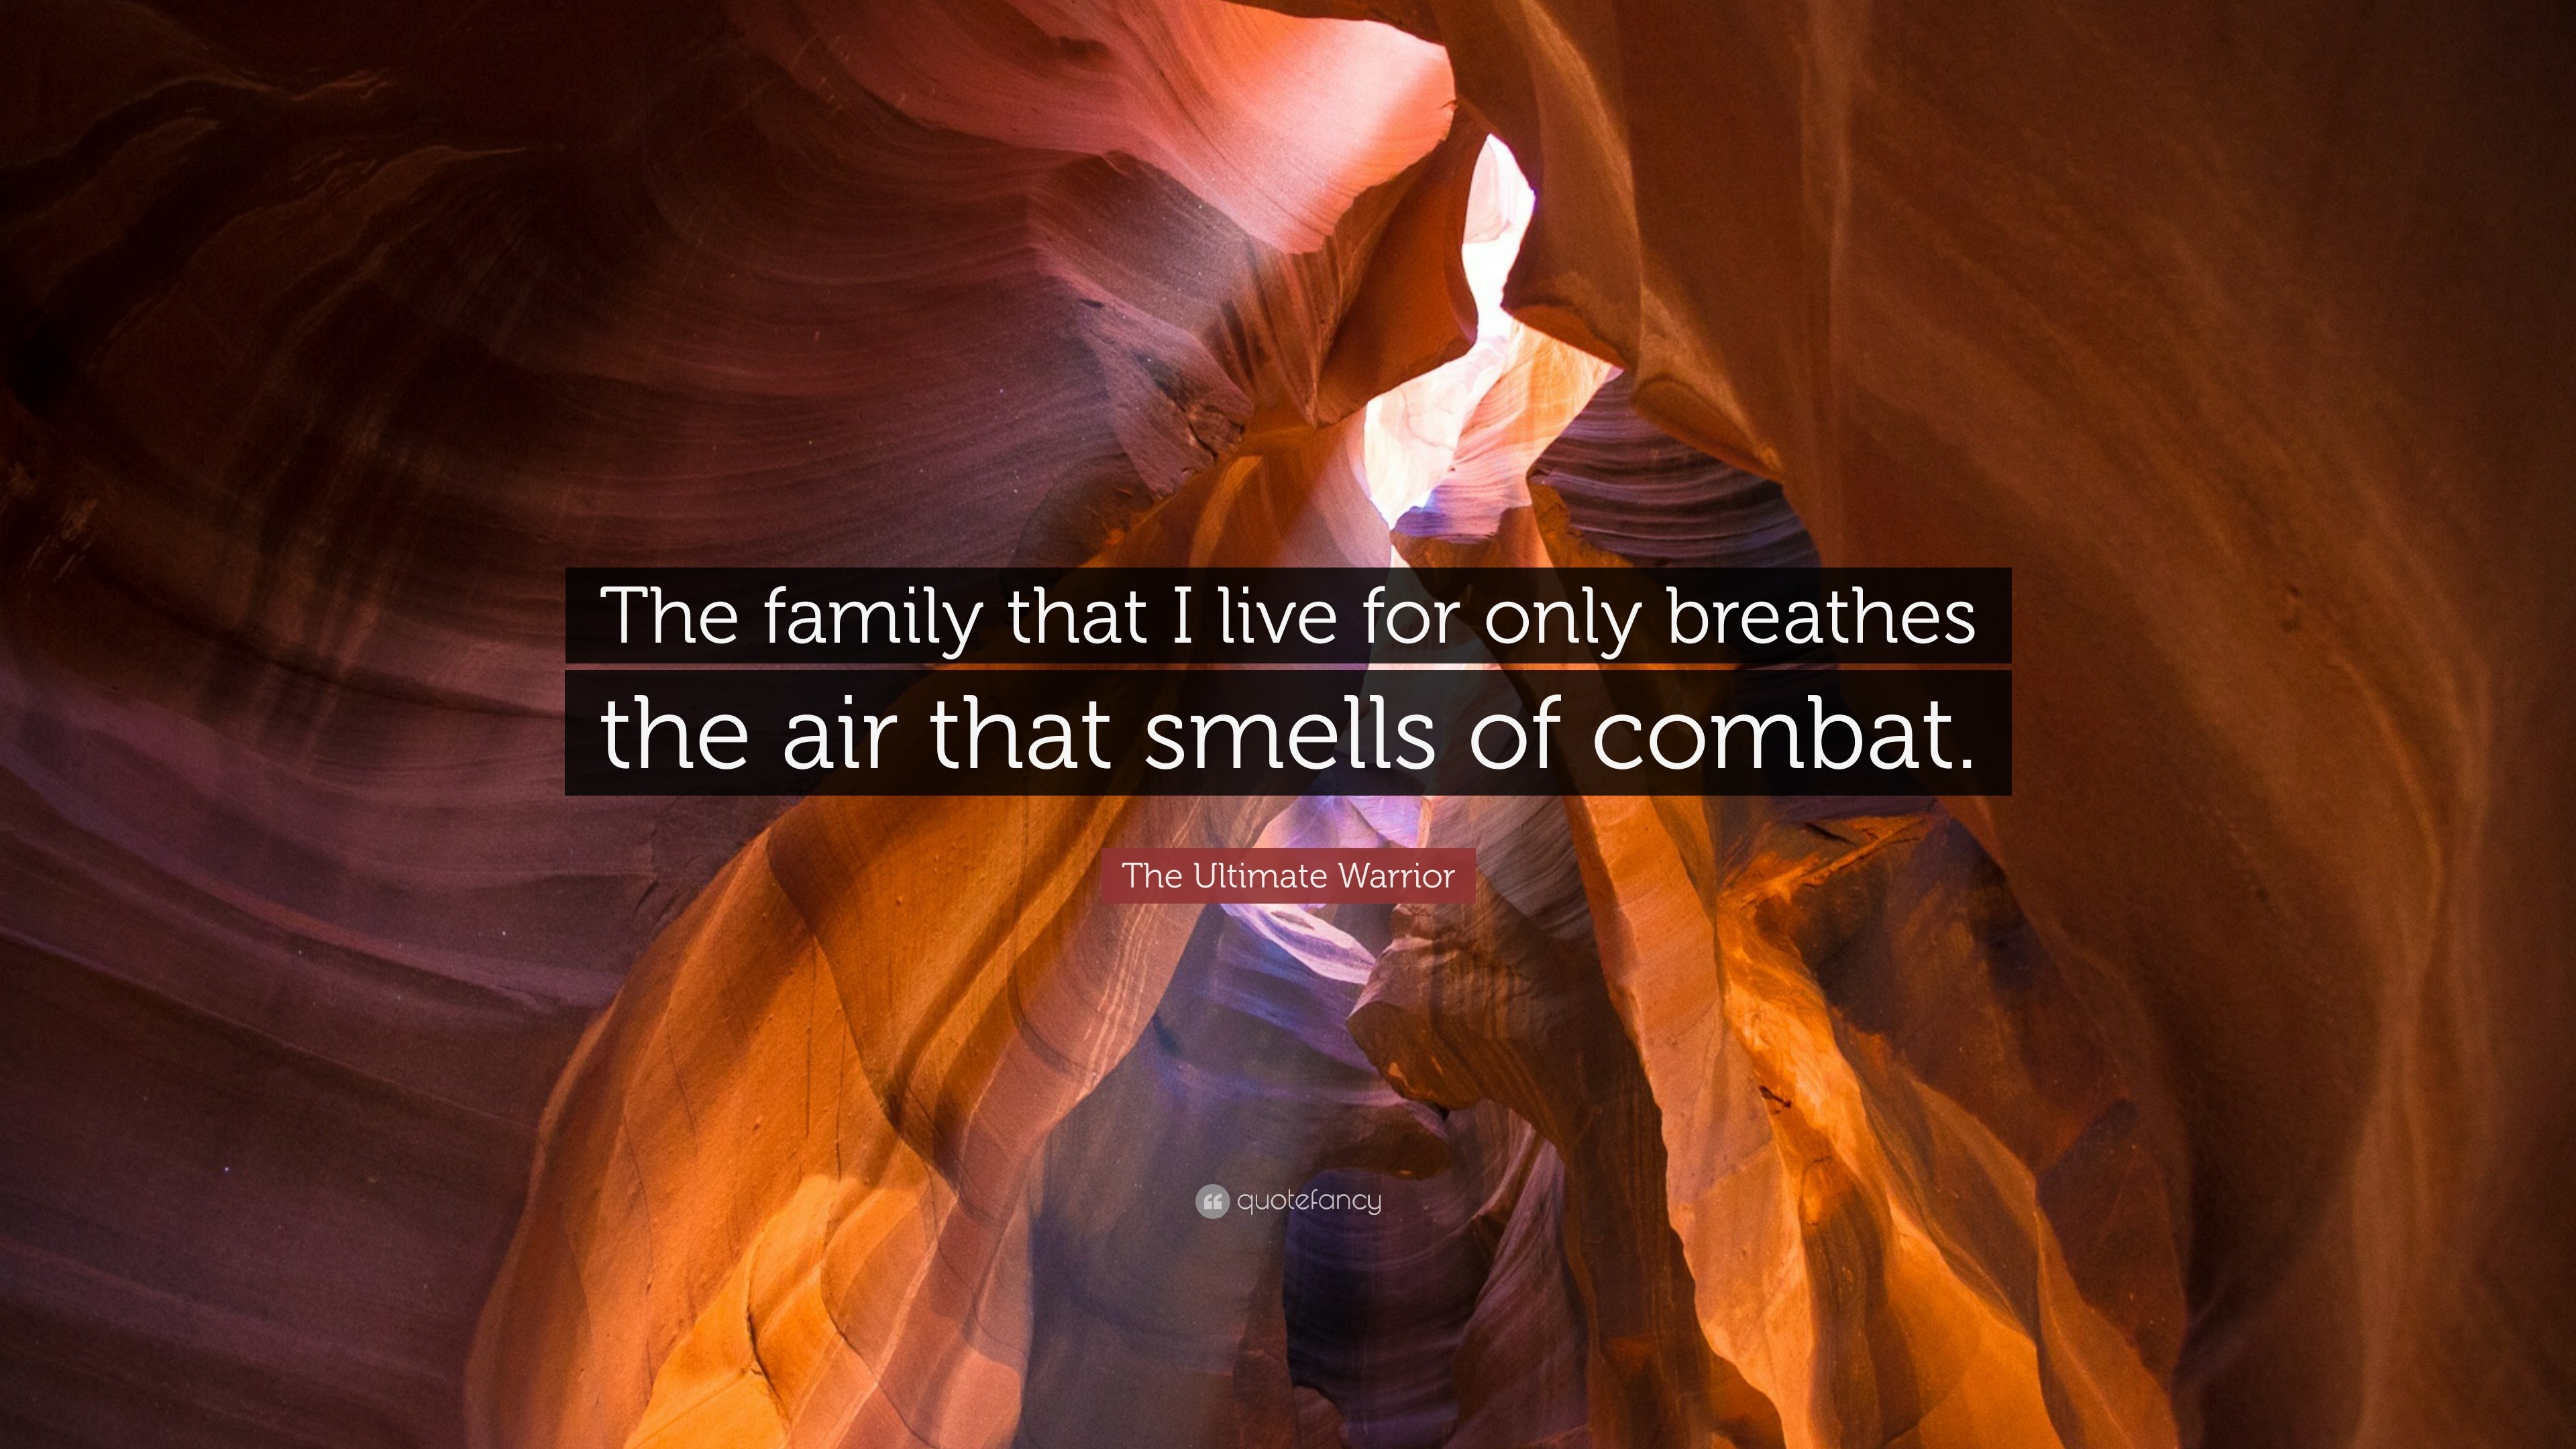 3840x2160 The Ultimate Warrior Quote: “The family that I live for only breathes the  air